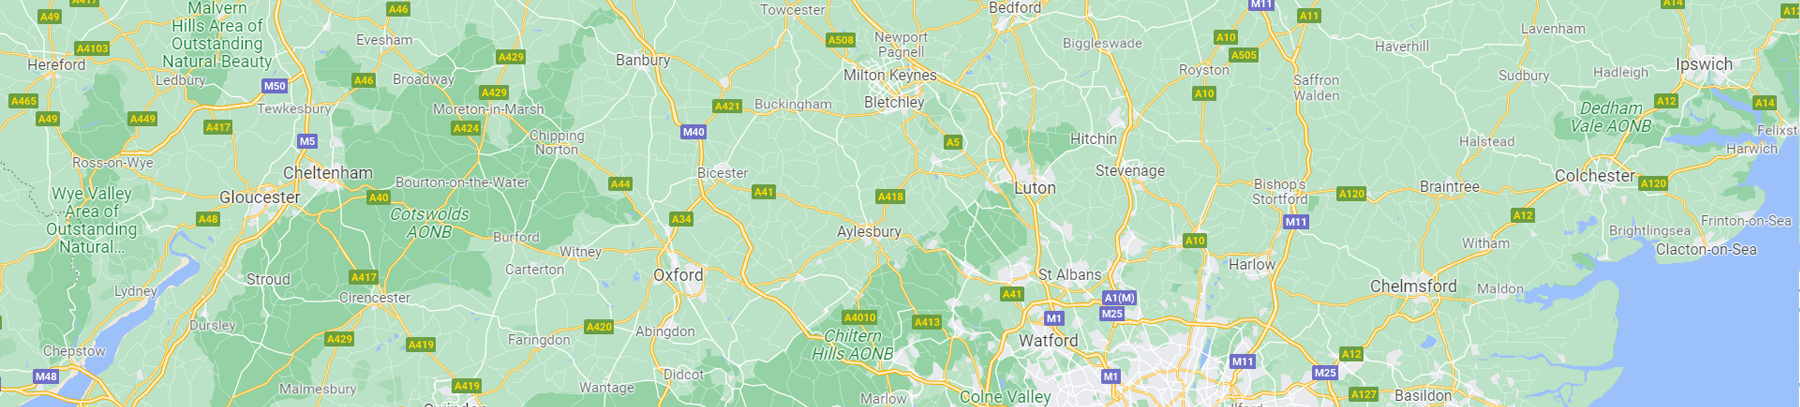 counties towns and villages we cover for cat5e cat6 ethernet network wiring and cabling installation include hertfordshire stevenage hitchin letchworth hatfield welwyn garden city old welwyn digswell hertford bengeo harpenden wheathamsted hemel hempsted chorley wood m twenty five area tring dunstable bedfordshire bedford sandy biggleswade broom royston essex roydon buckinghamshire north london barnet enfield loughton elstree A1 colne valley